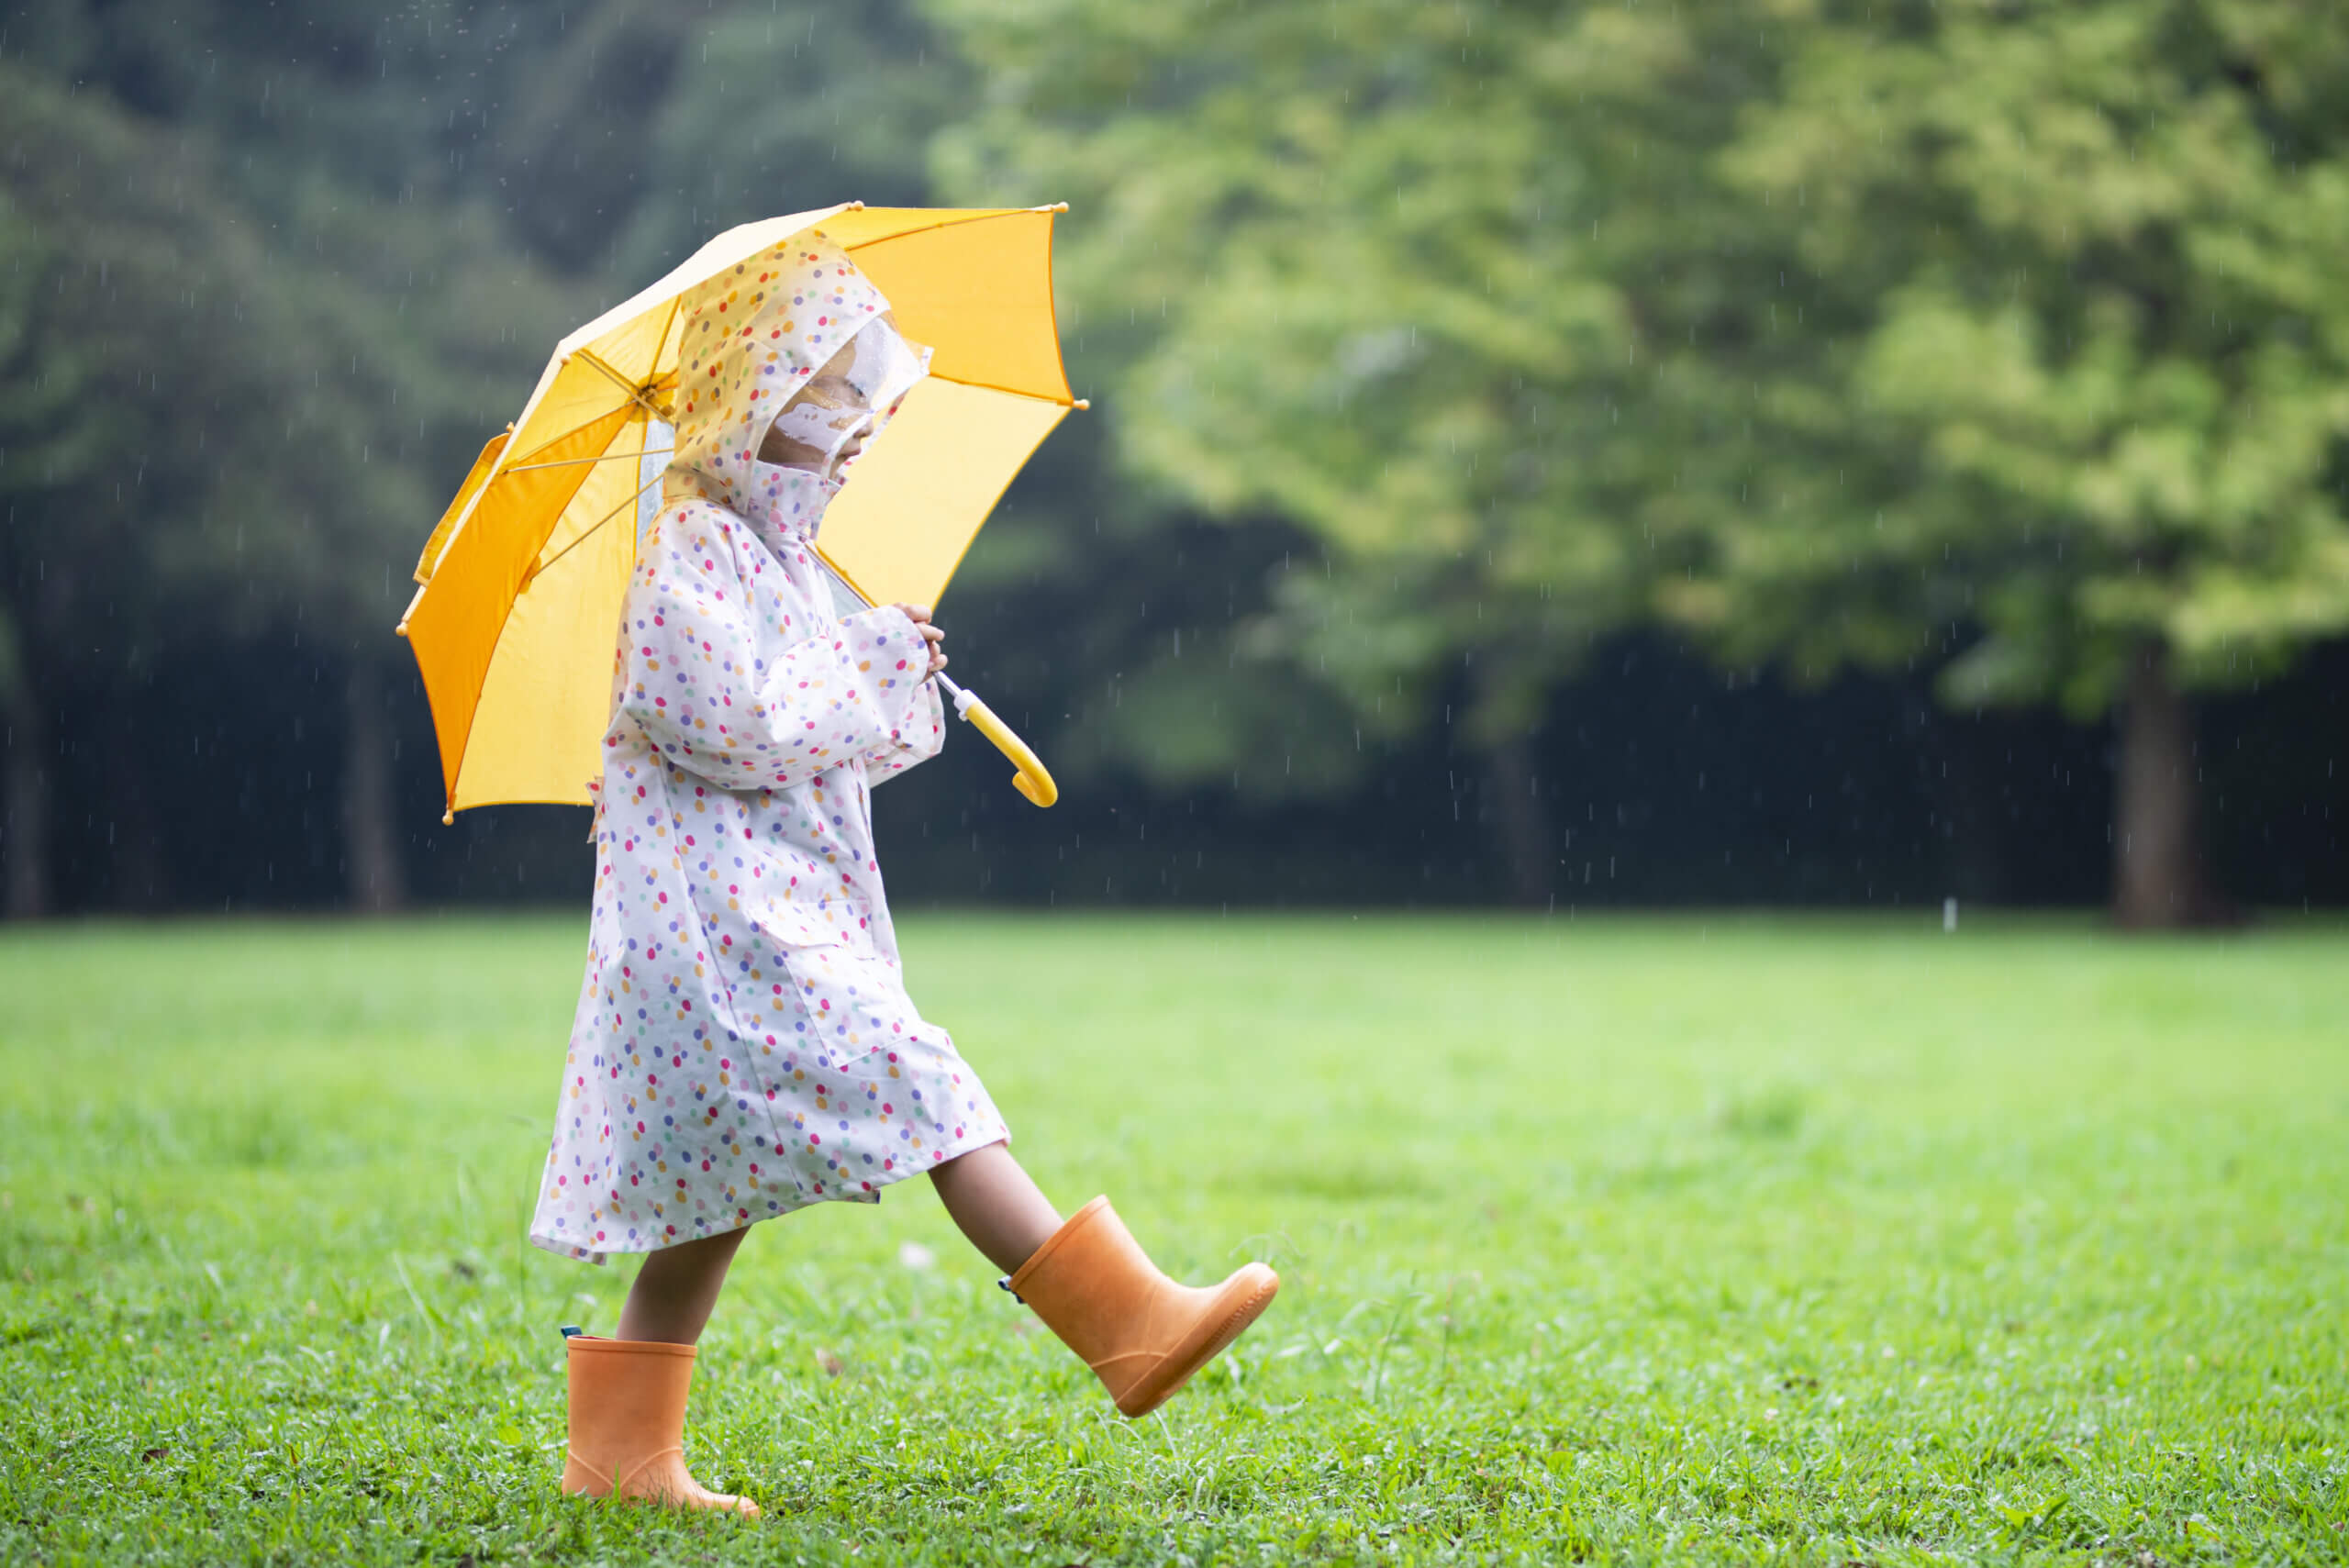 Person standing in the rain walking on grass with umbrella during summer showers.